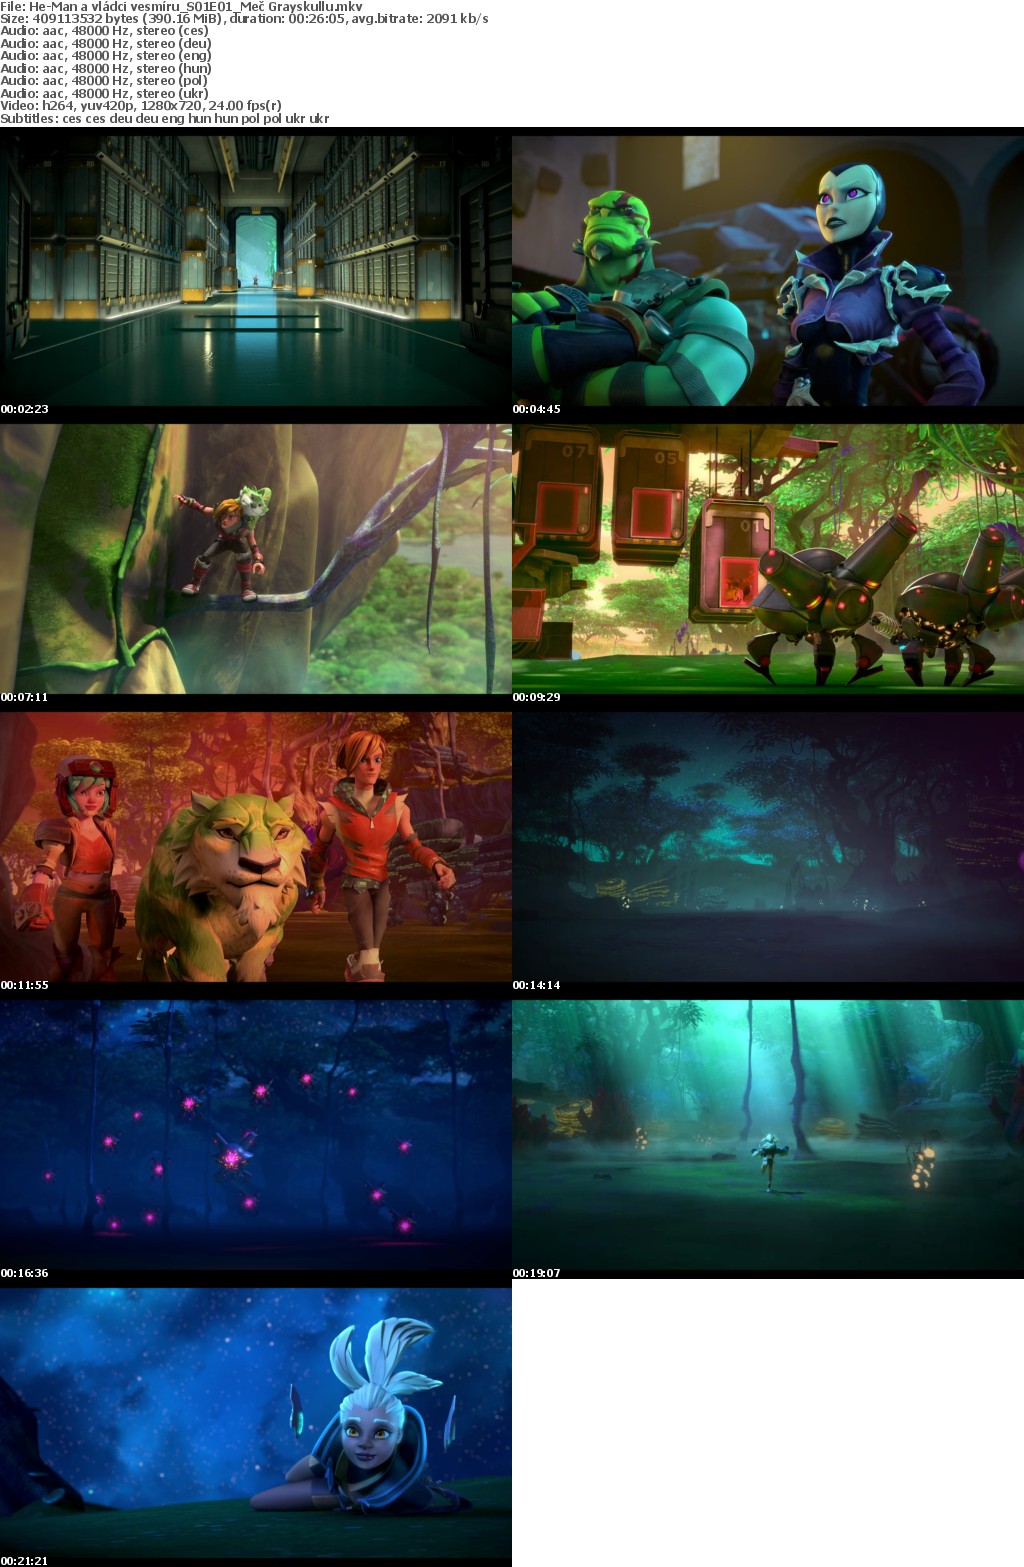 He-Man and the Masters of the Universe (S01)(2021)(720p)(x264)(WebDl)(Multi 6 lang)(MultiSUB) PHDTeam